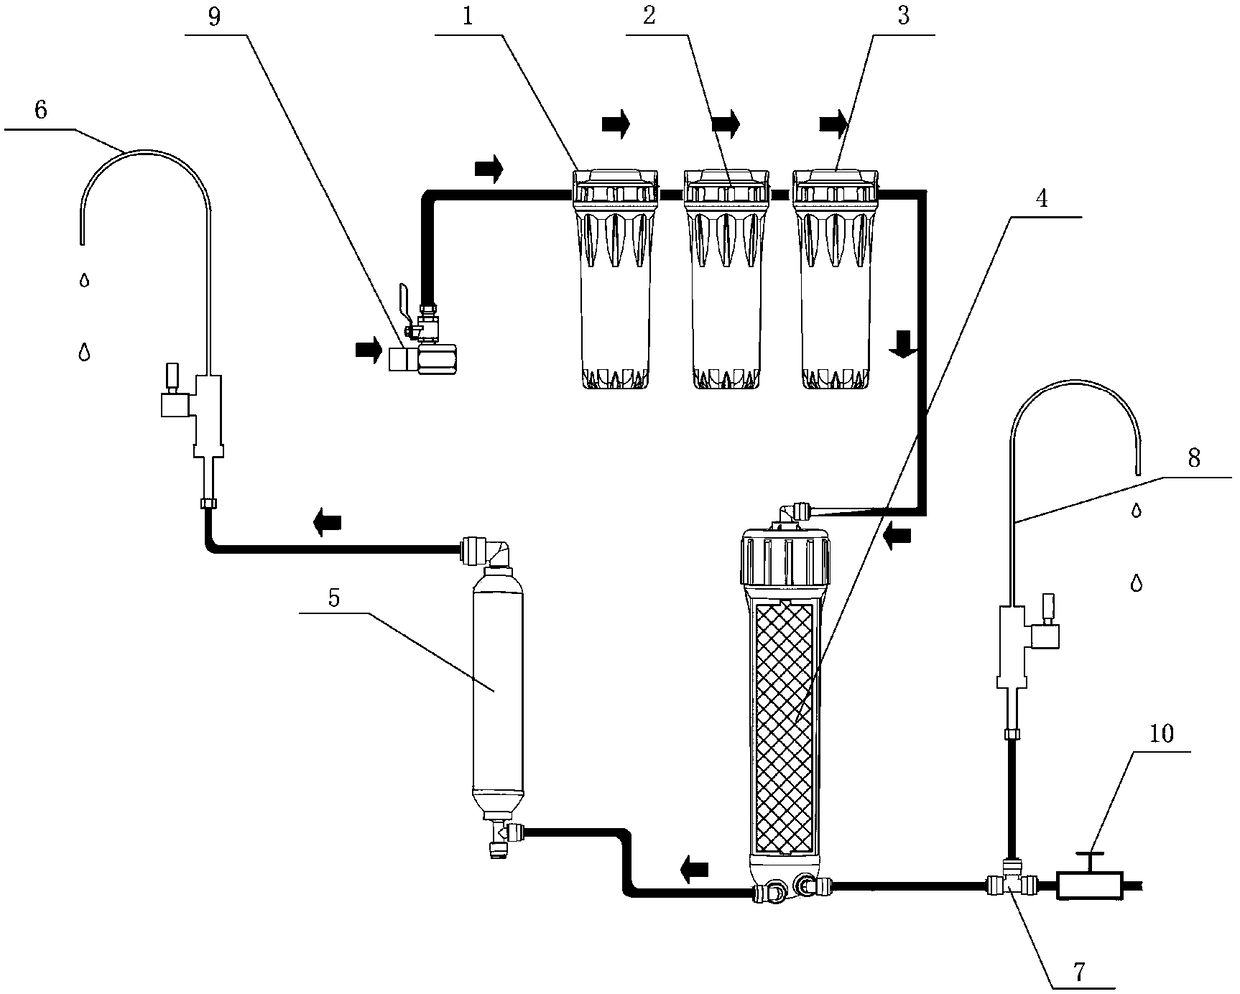 A household reverse osmosis water purifier without electricity and waste water